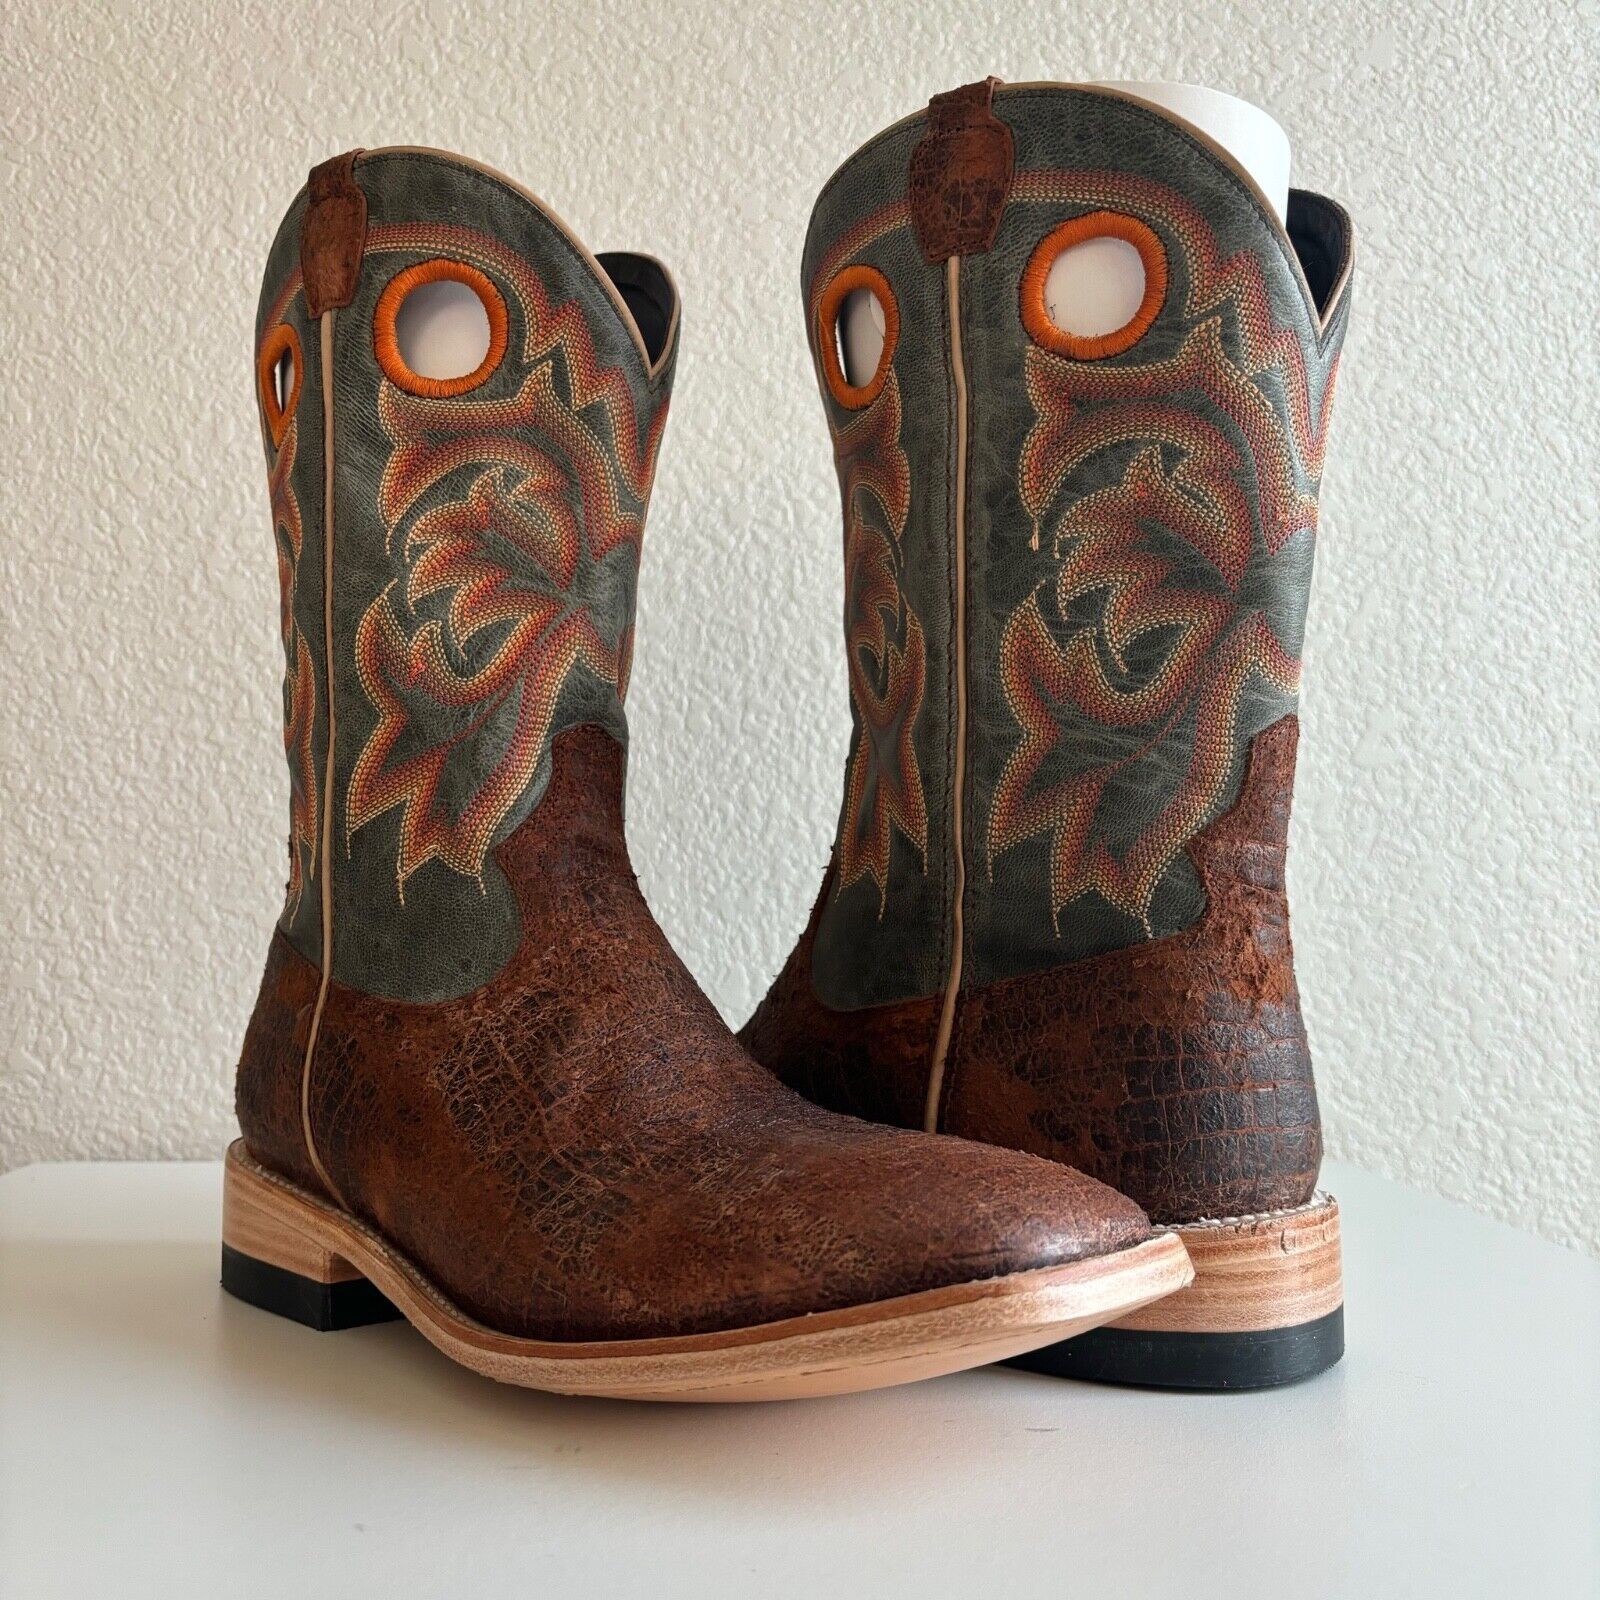 Primary image for New Lane Capitan Brown Cowboy Boots Mens 10 D Wide Square Toe Leather Western